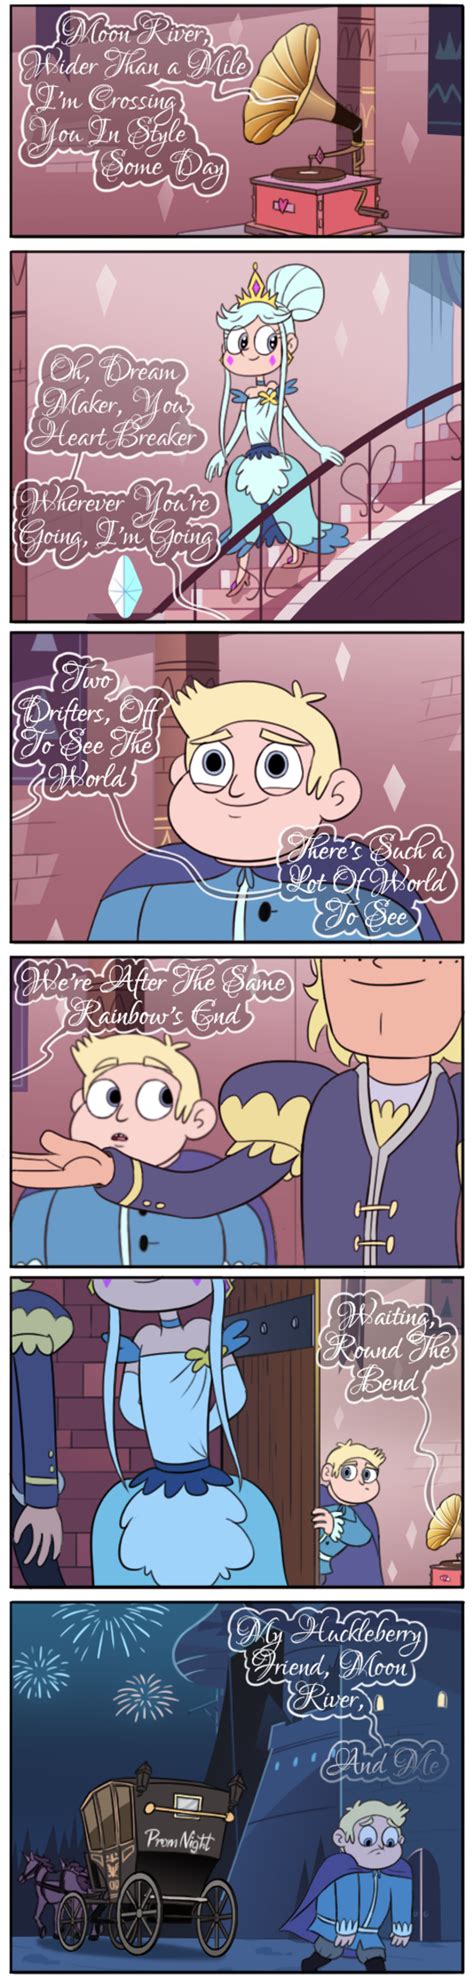 history repeats itself by moringmark star vs the forces of evil know your meme